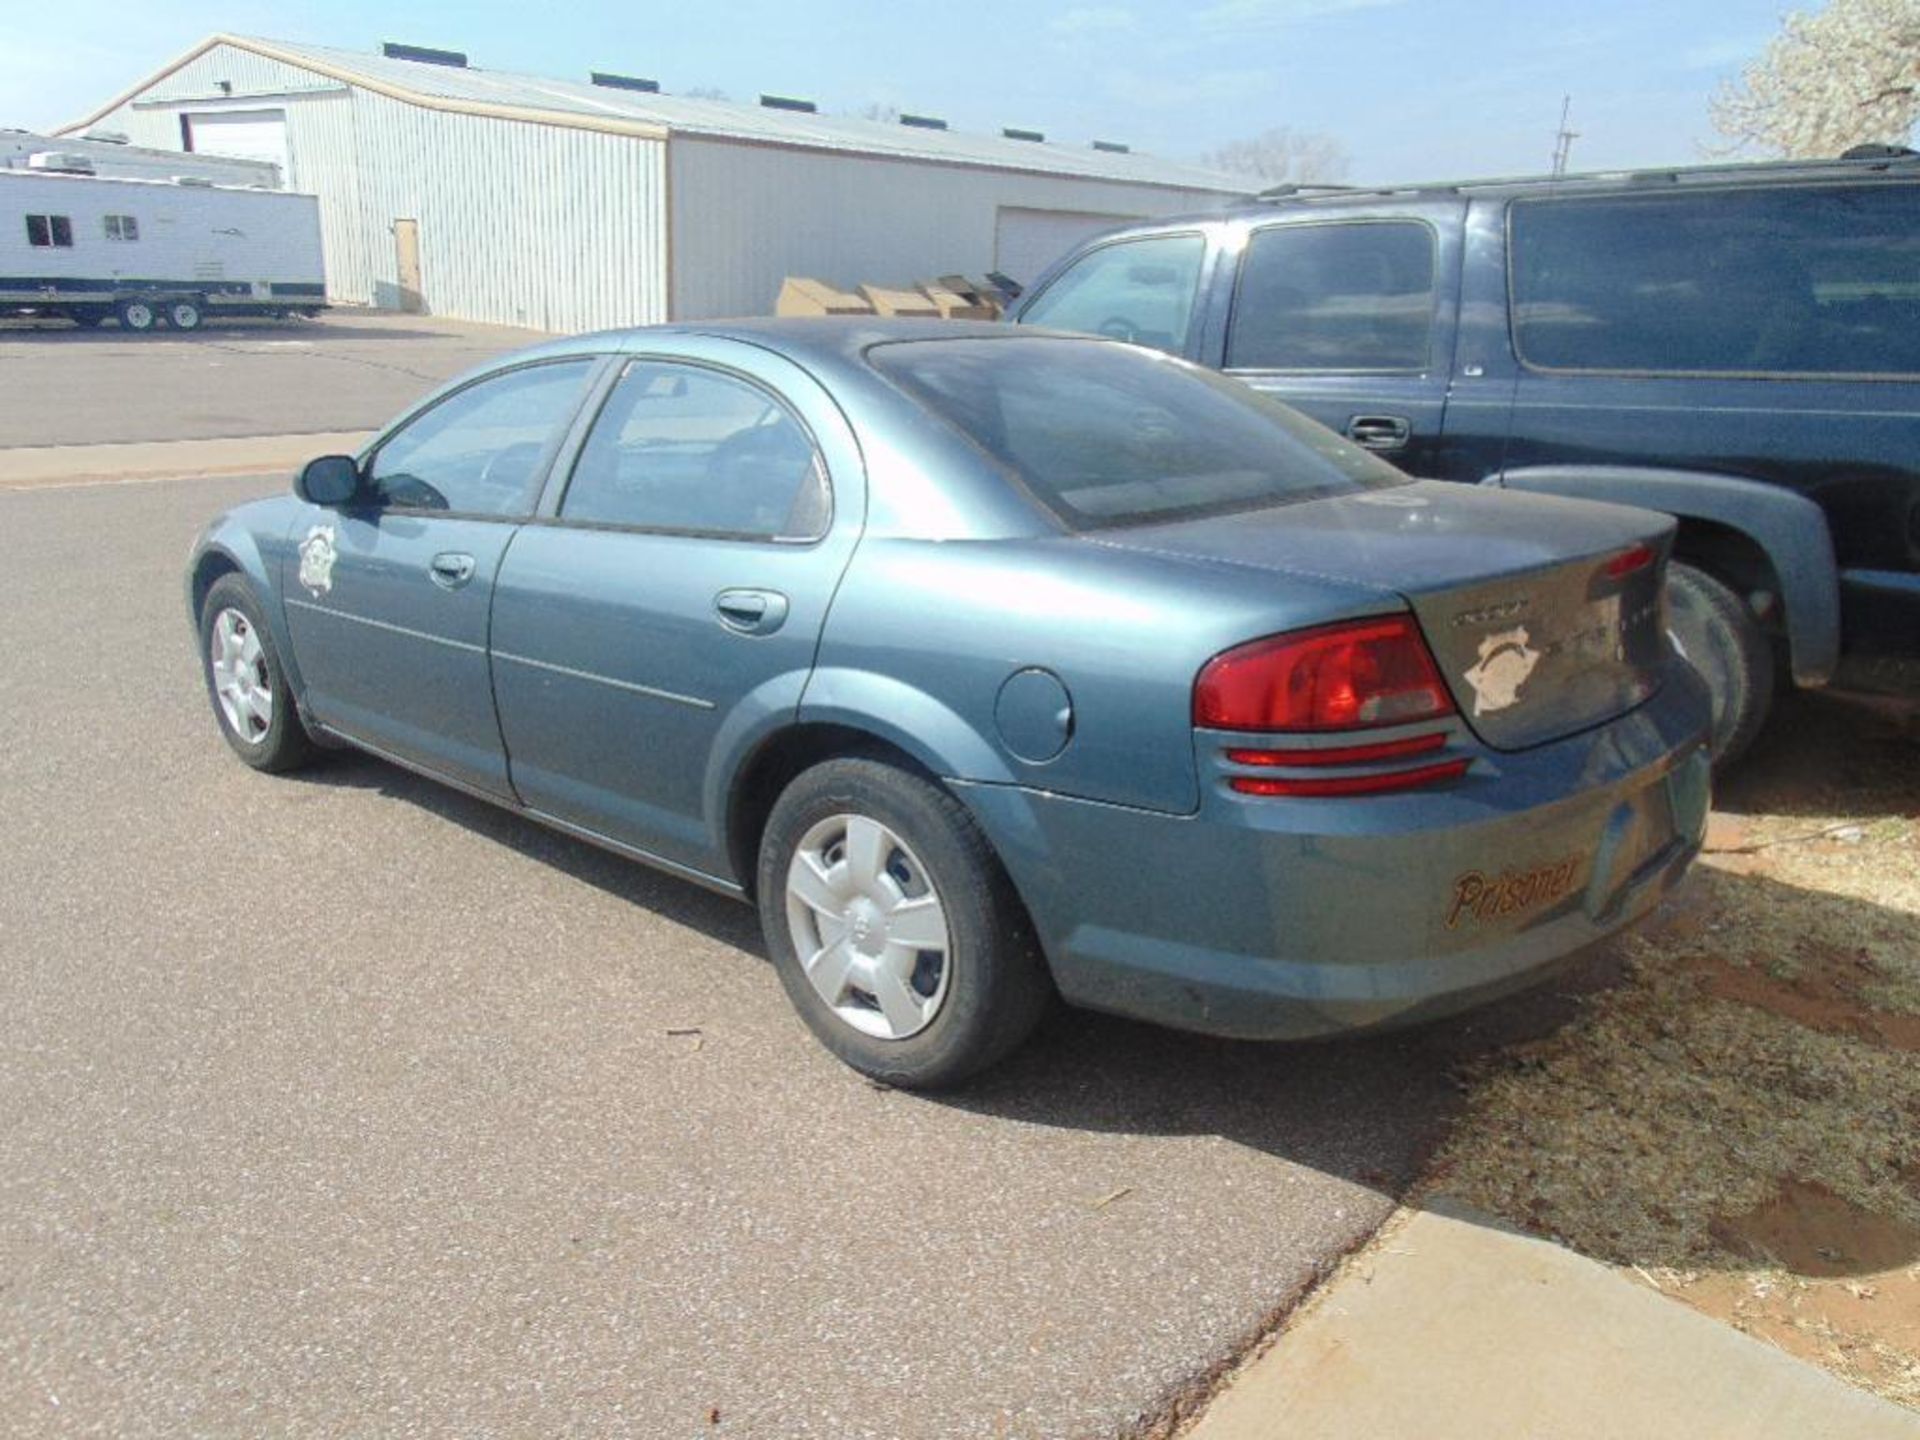 2006 Dodge Stratus s/n 1b3al46t36n229662, 2.7 liter gas eng, auto trans, odometer reads 192853 miles - Image 3 of 5